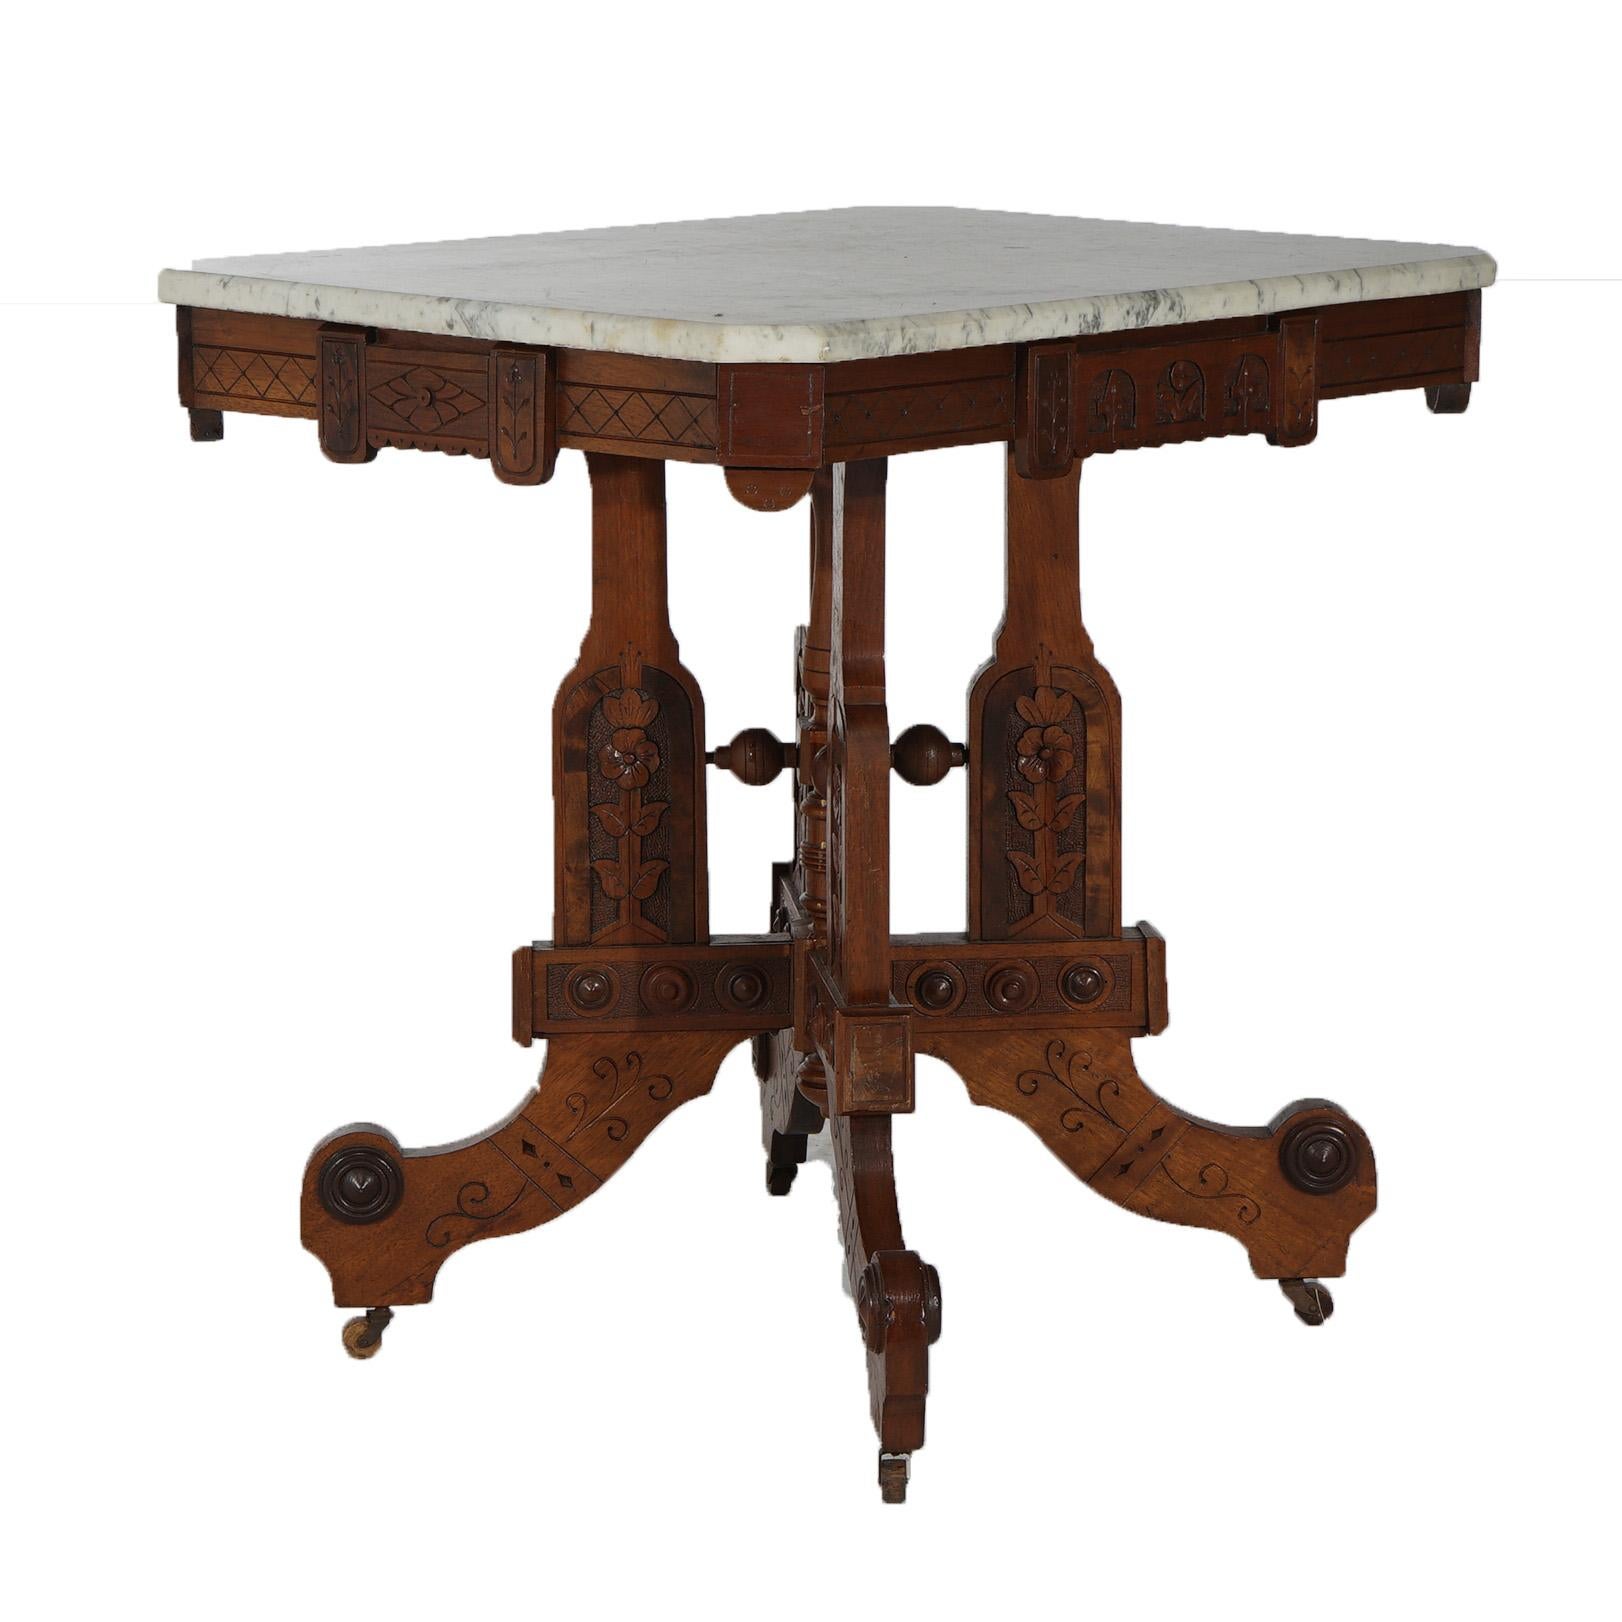 Antique Eastlake Aesthetic Floral Carved Walnut & Marble Parlor Table, c1880 For Sale 4